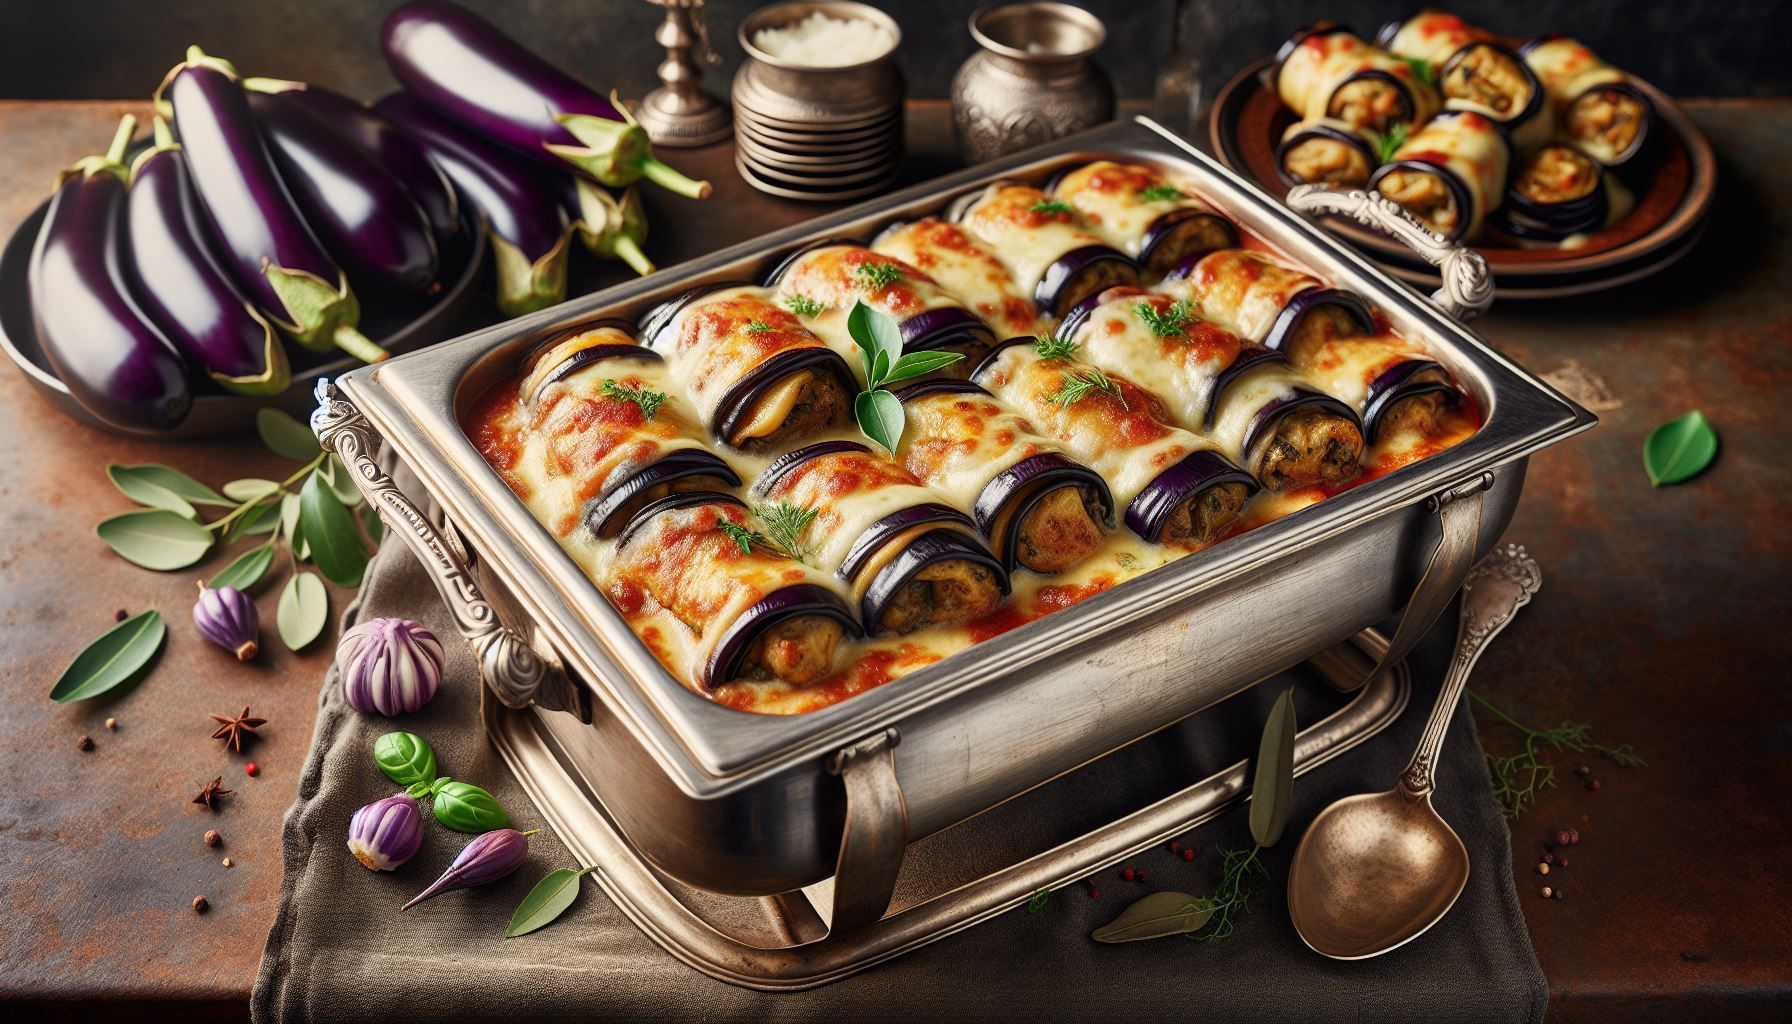 A casserole dish filled with eggplant rolls on a table.